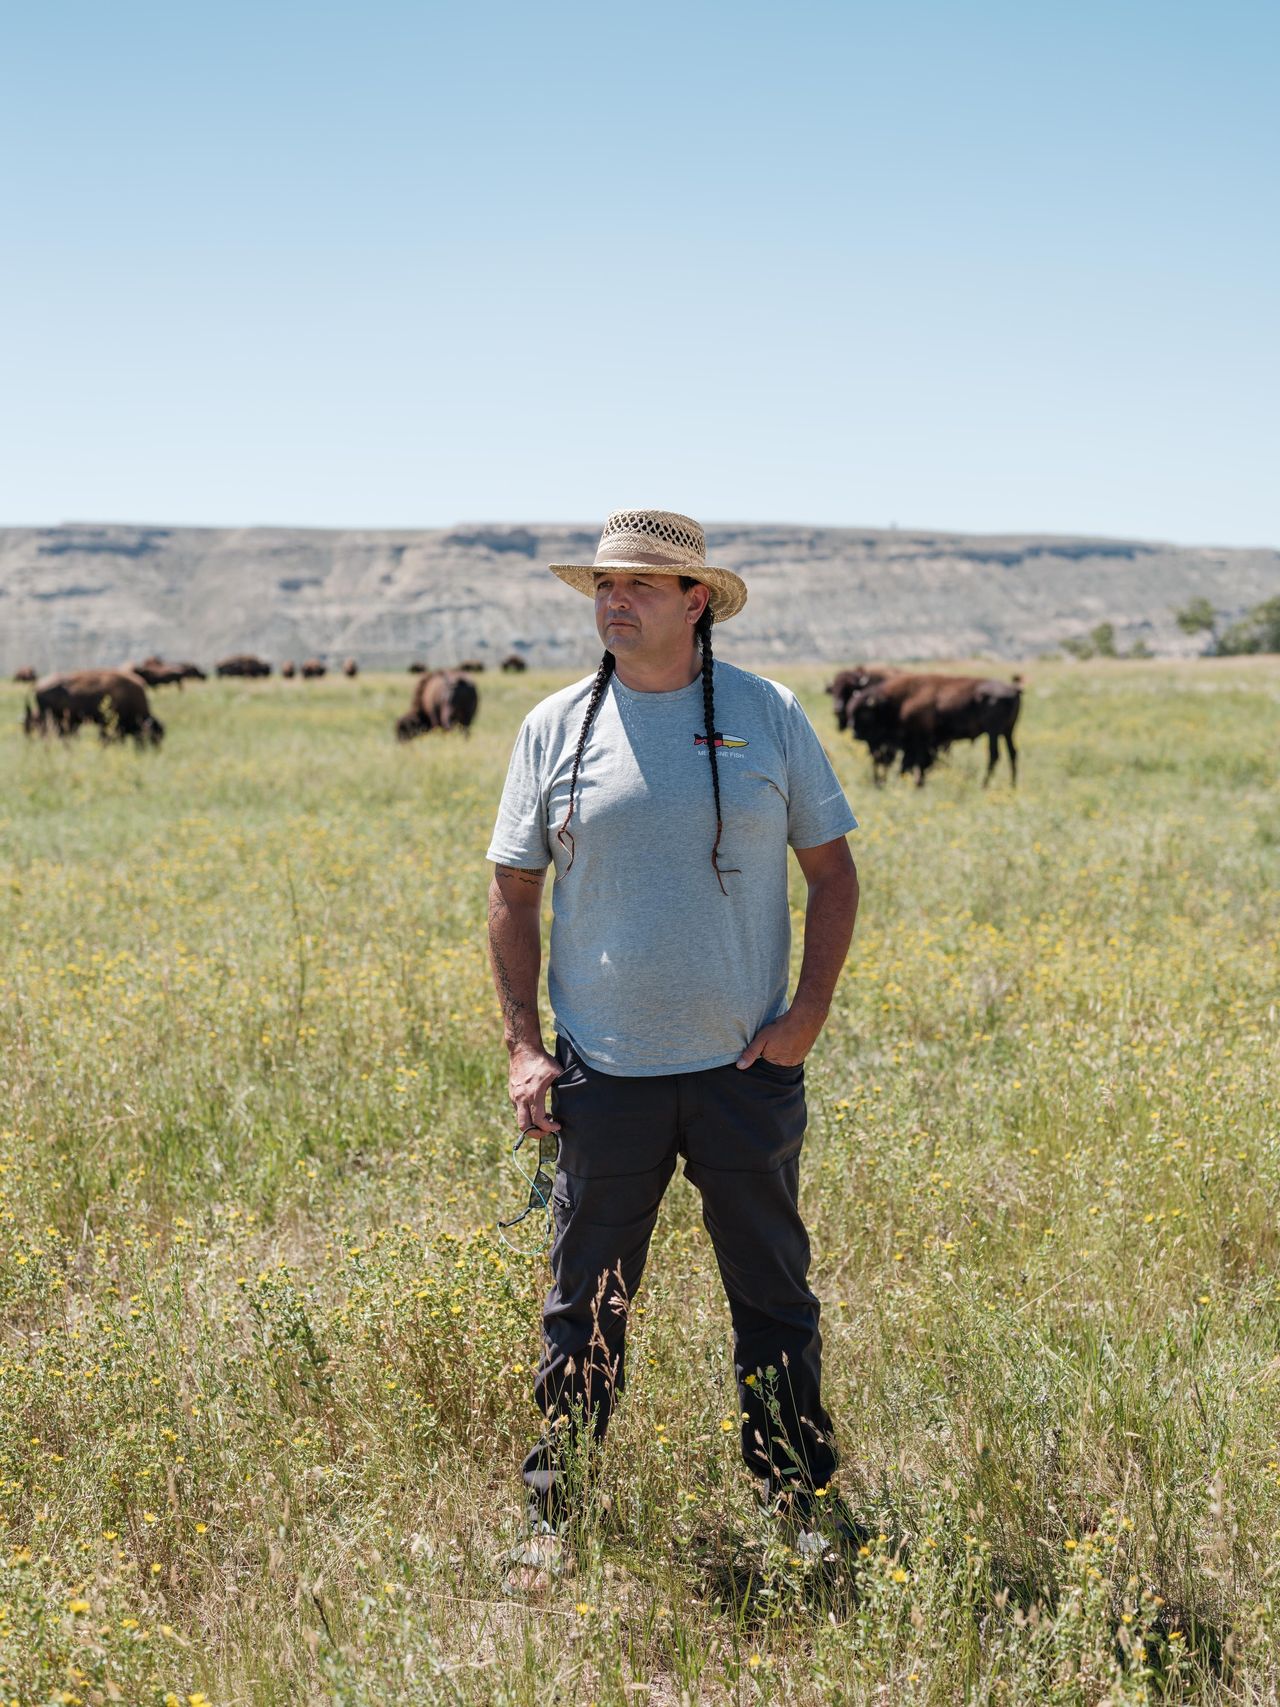 Baldes' interest in buffalo restoration started when he was young. "Being a kid, we used to hunt and fish, pronghorn, elk, deer — and the buffalo were the only one missing. This is about cultural revitalization, decolonization and community."